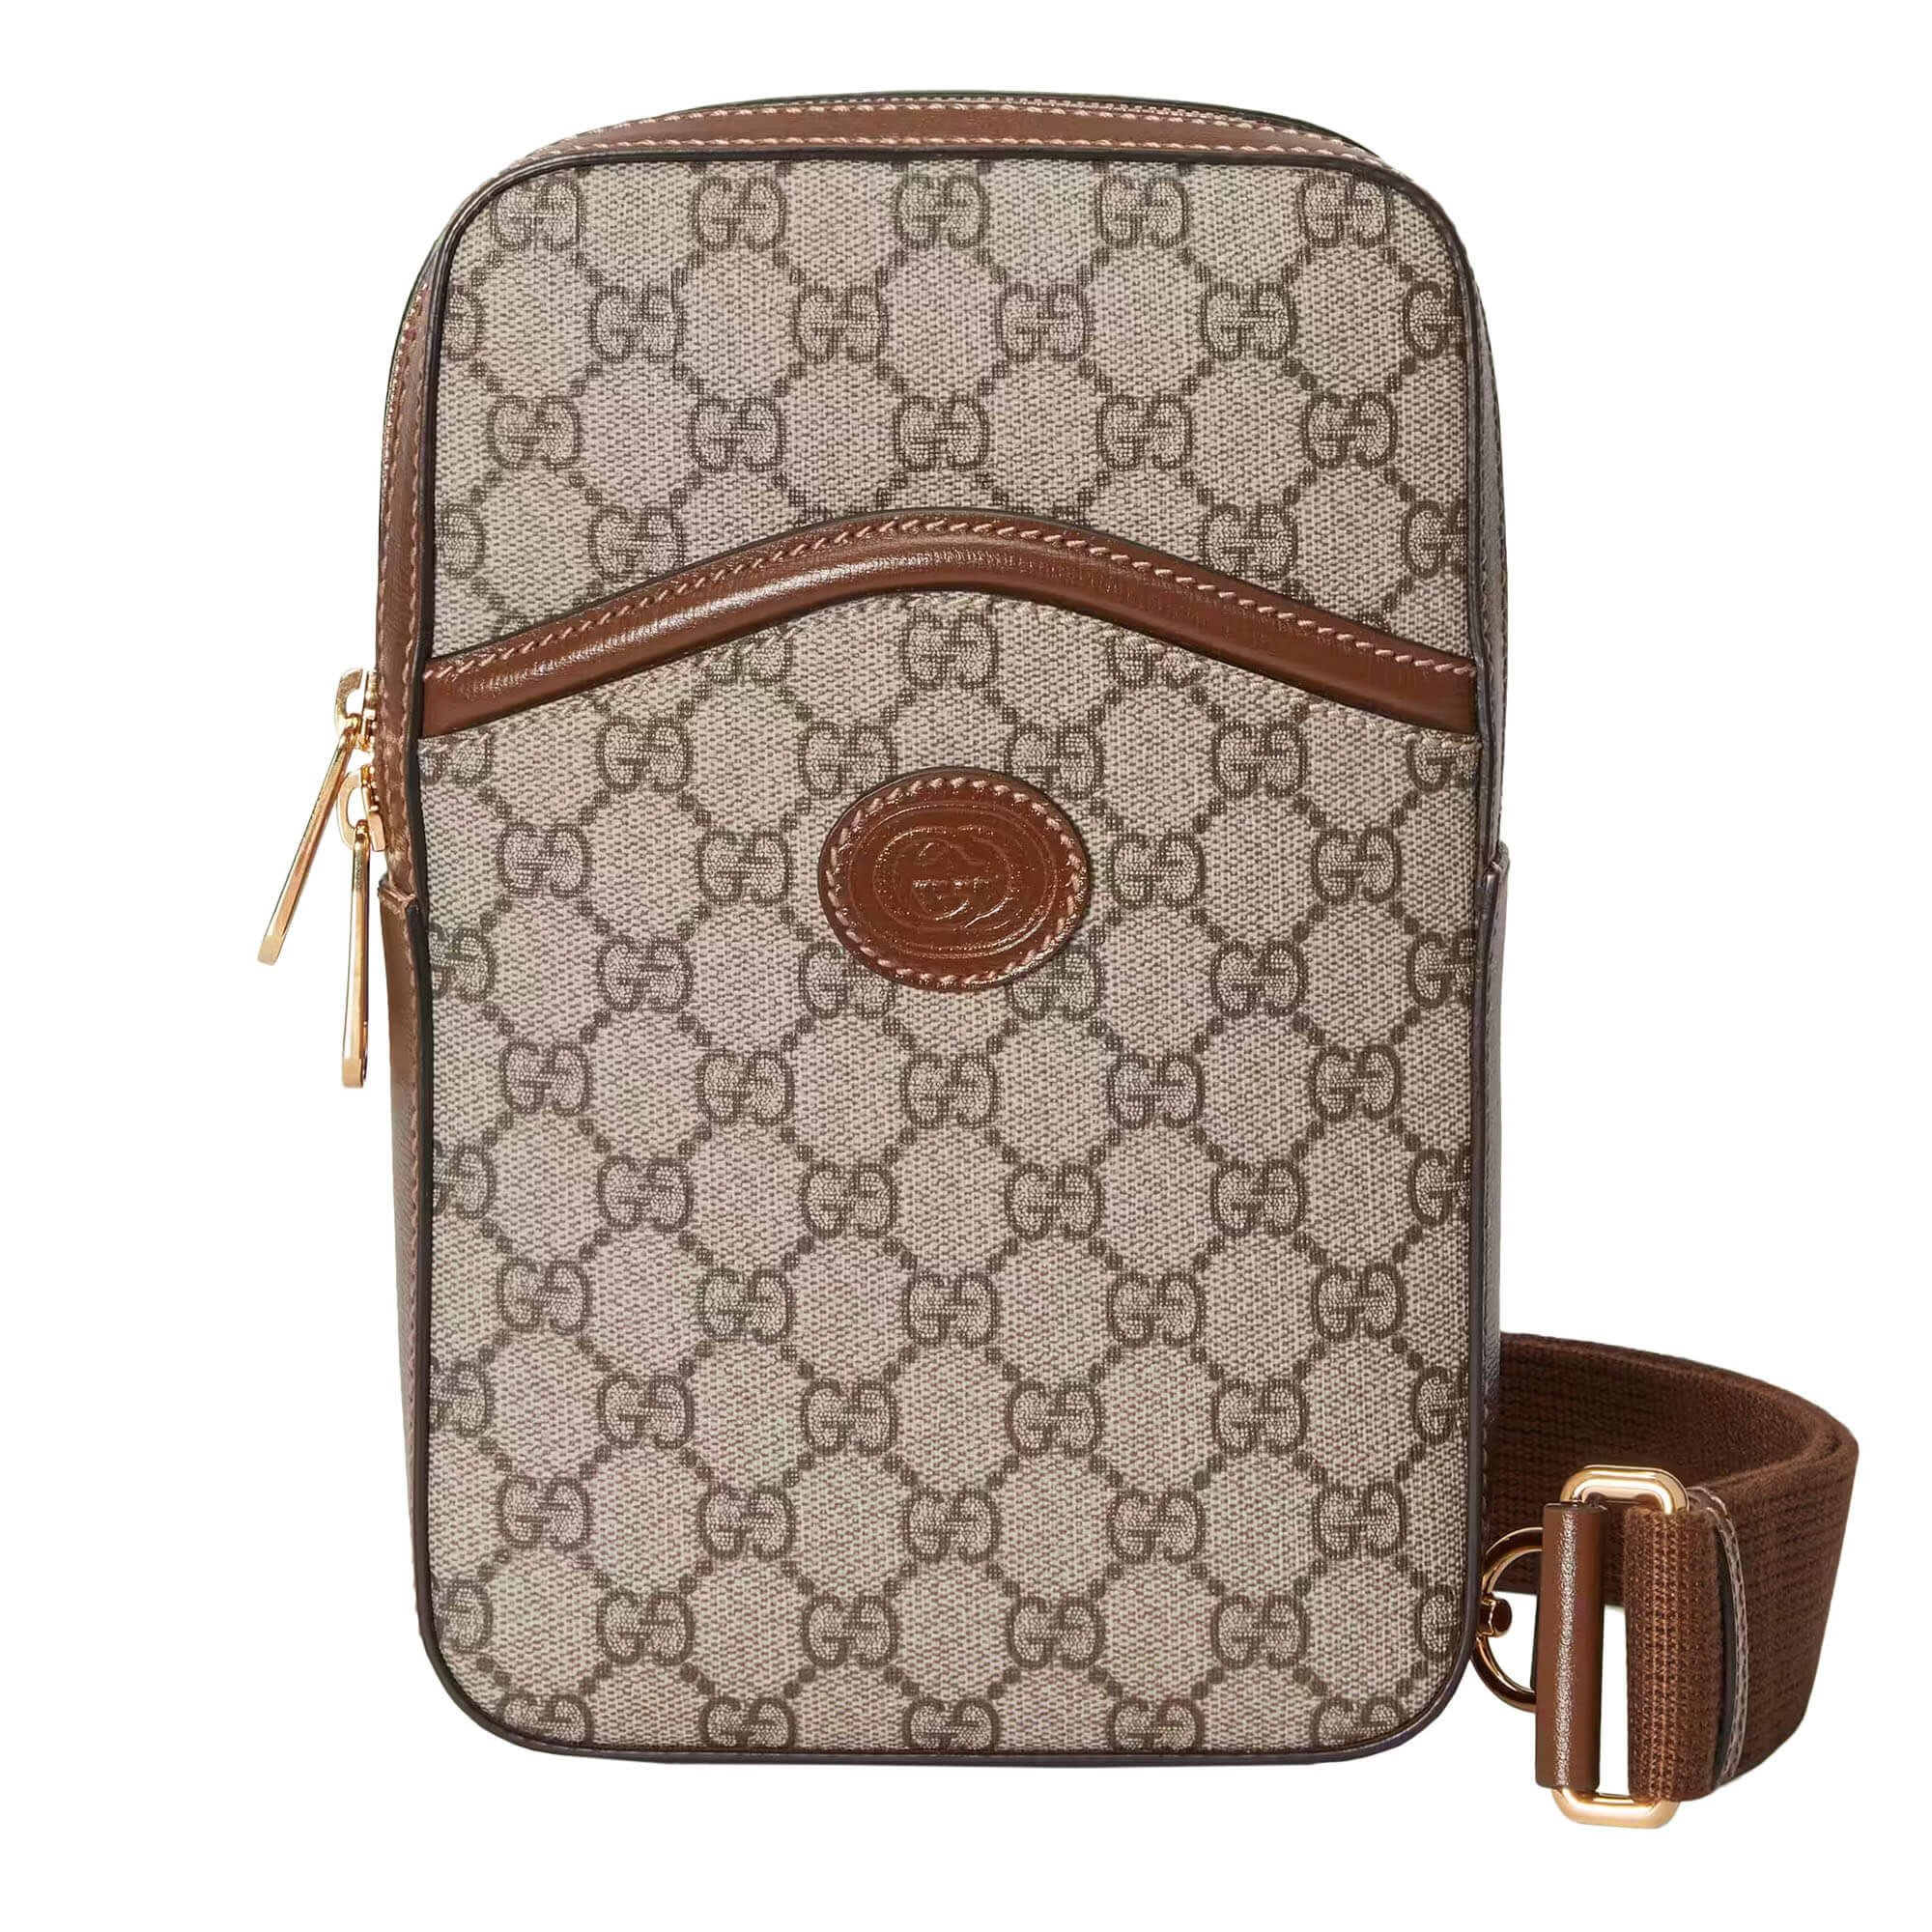 Gucci GG Supreme Fabric Backpack in Natural for Men